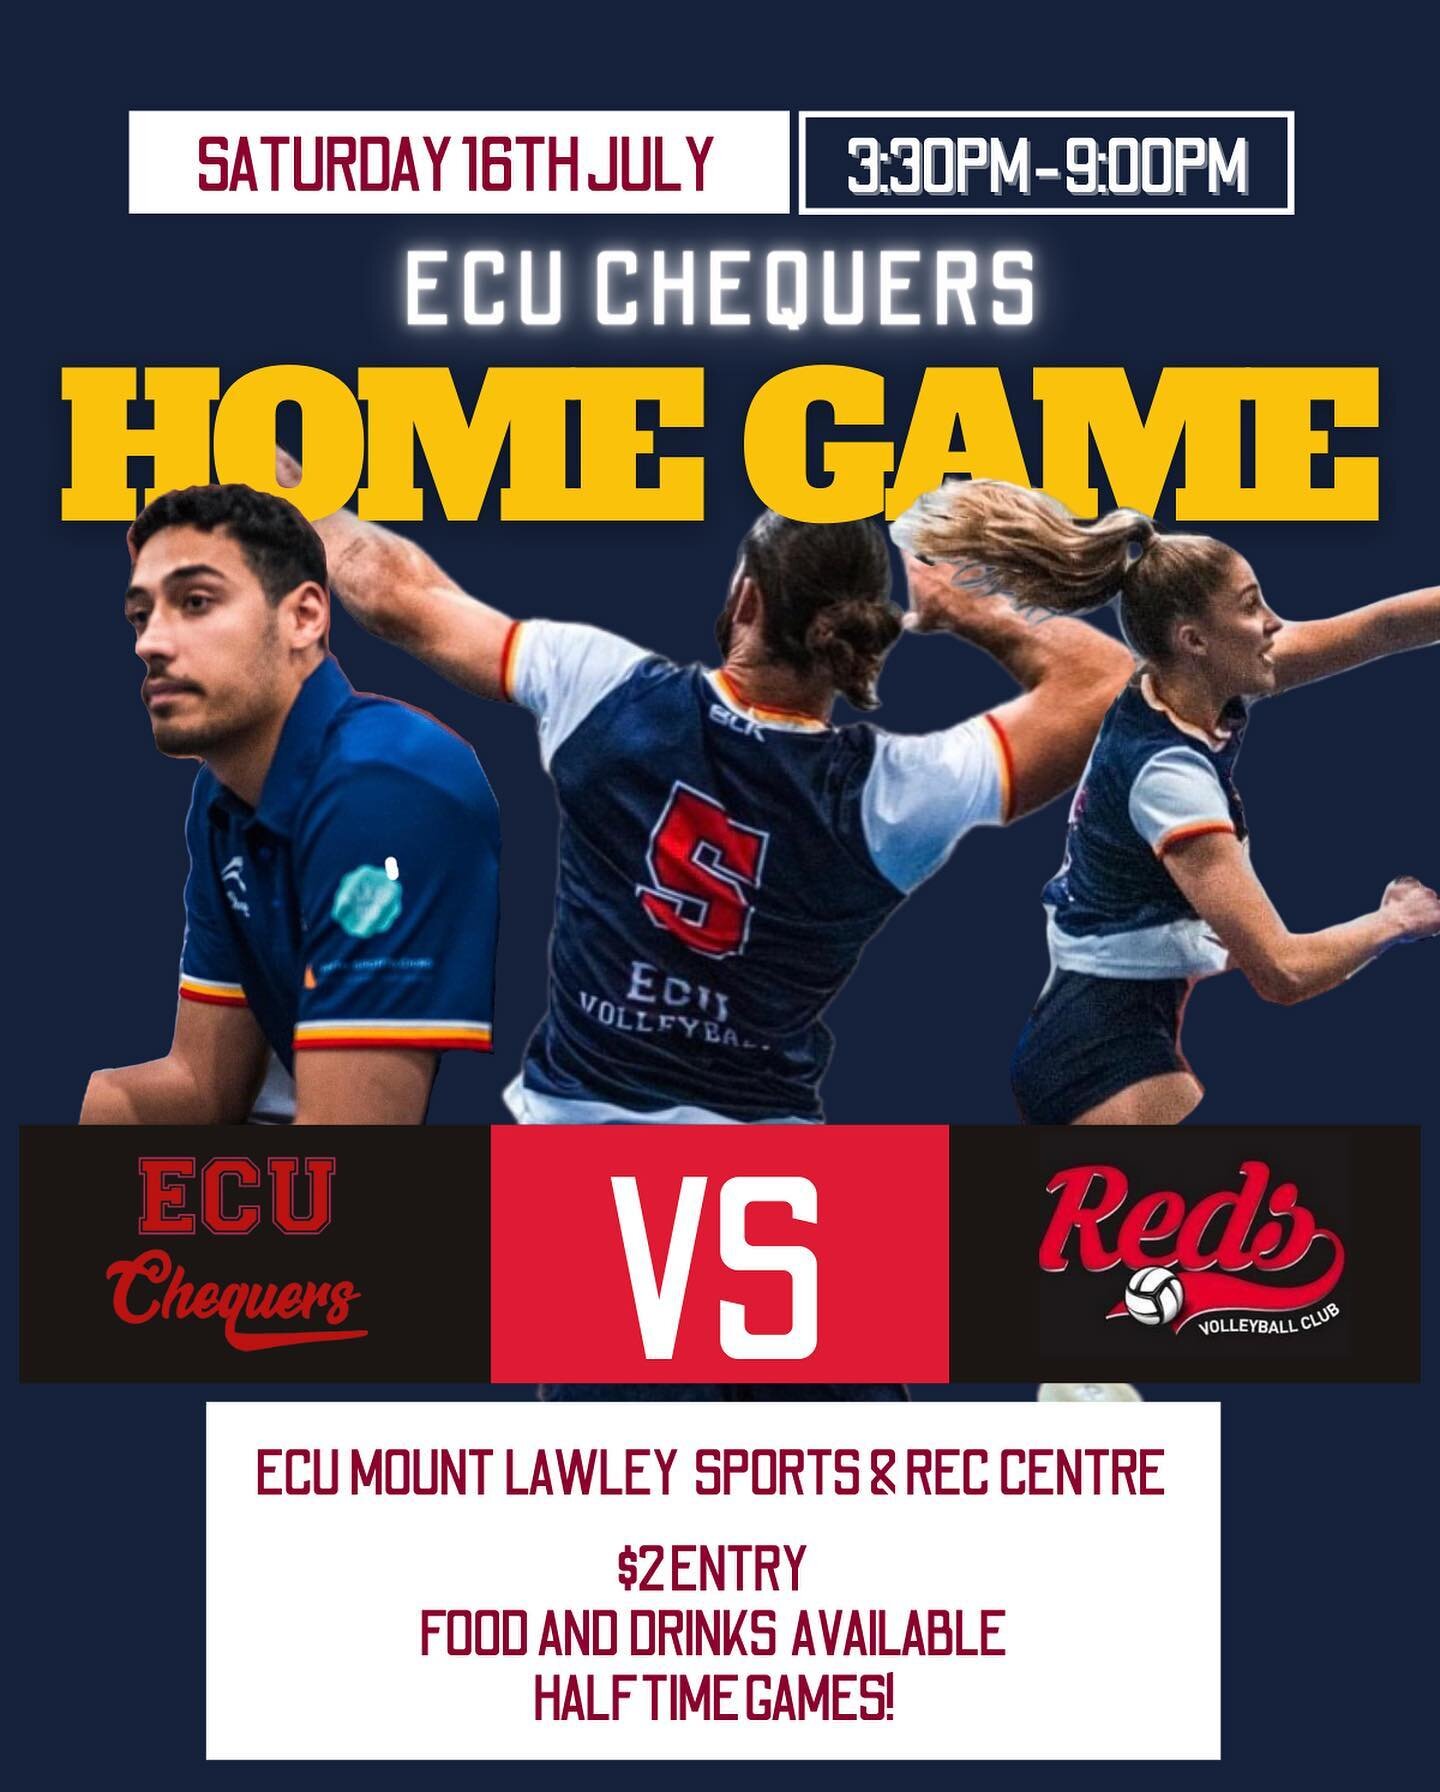 📣 HOME GAME 📣

We are excited to invite you to our State League home game against @redsvolley 💪

⏰ WHEN
Saturday 16th of July
3:30PM STATE LEAGUE RESERVE MENS &amp; WOMENS
5:00PM STATE LEAGUE WOMENS
HALF TIME GAMES
7:00PM STATE LEAGUE MENS

📍WHER